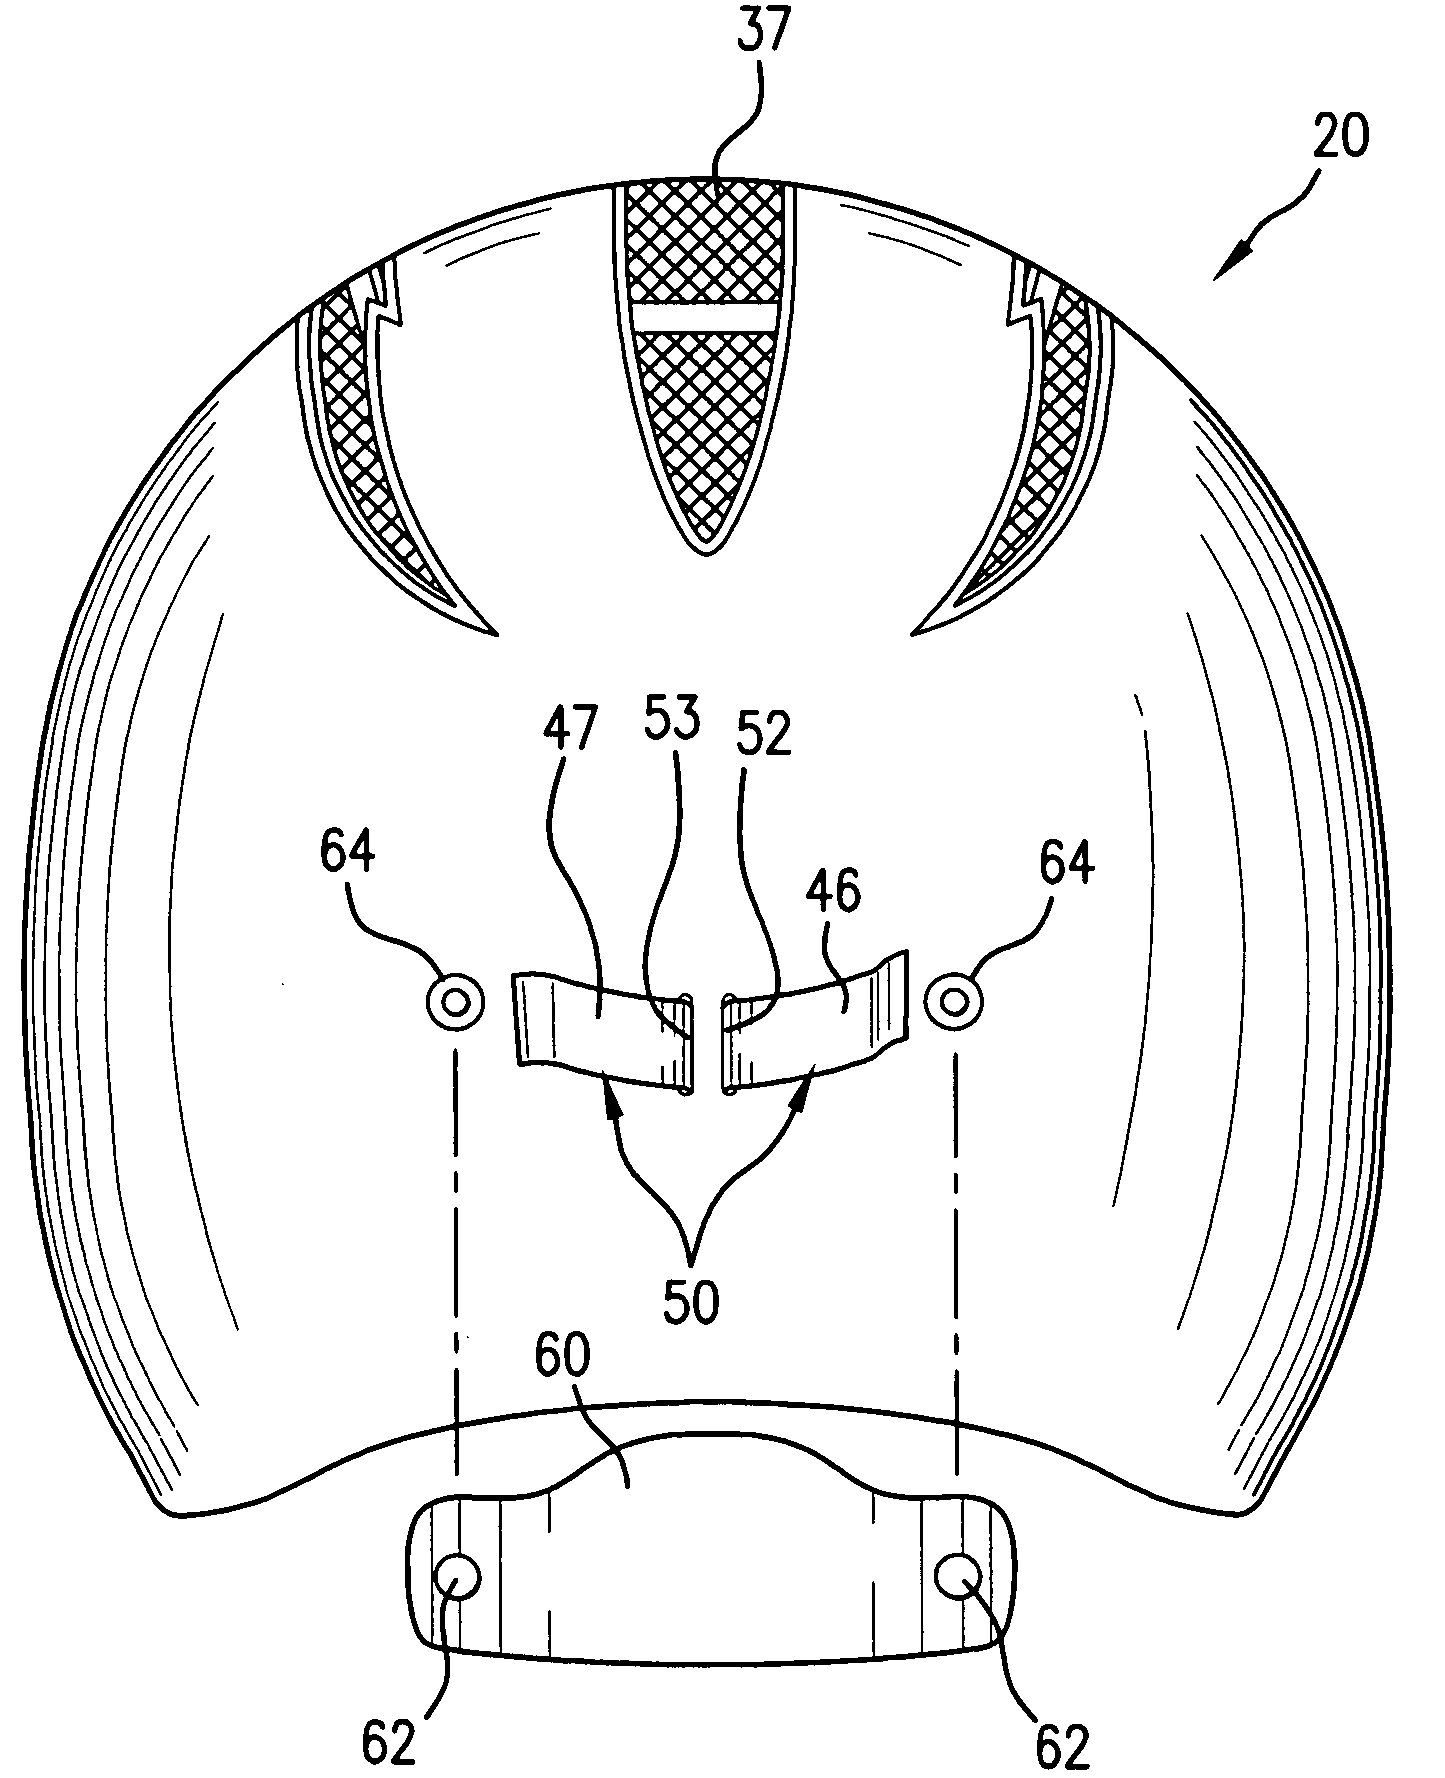 Protective helmet with adjustable support